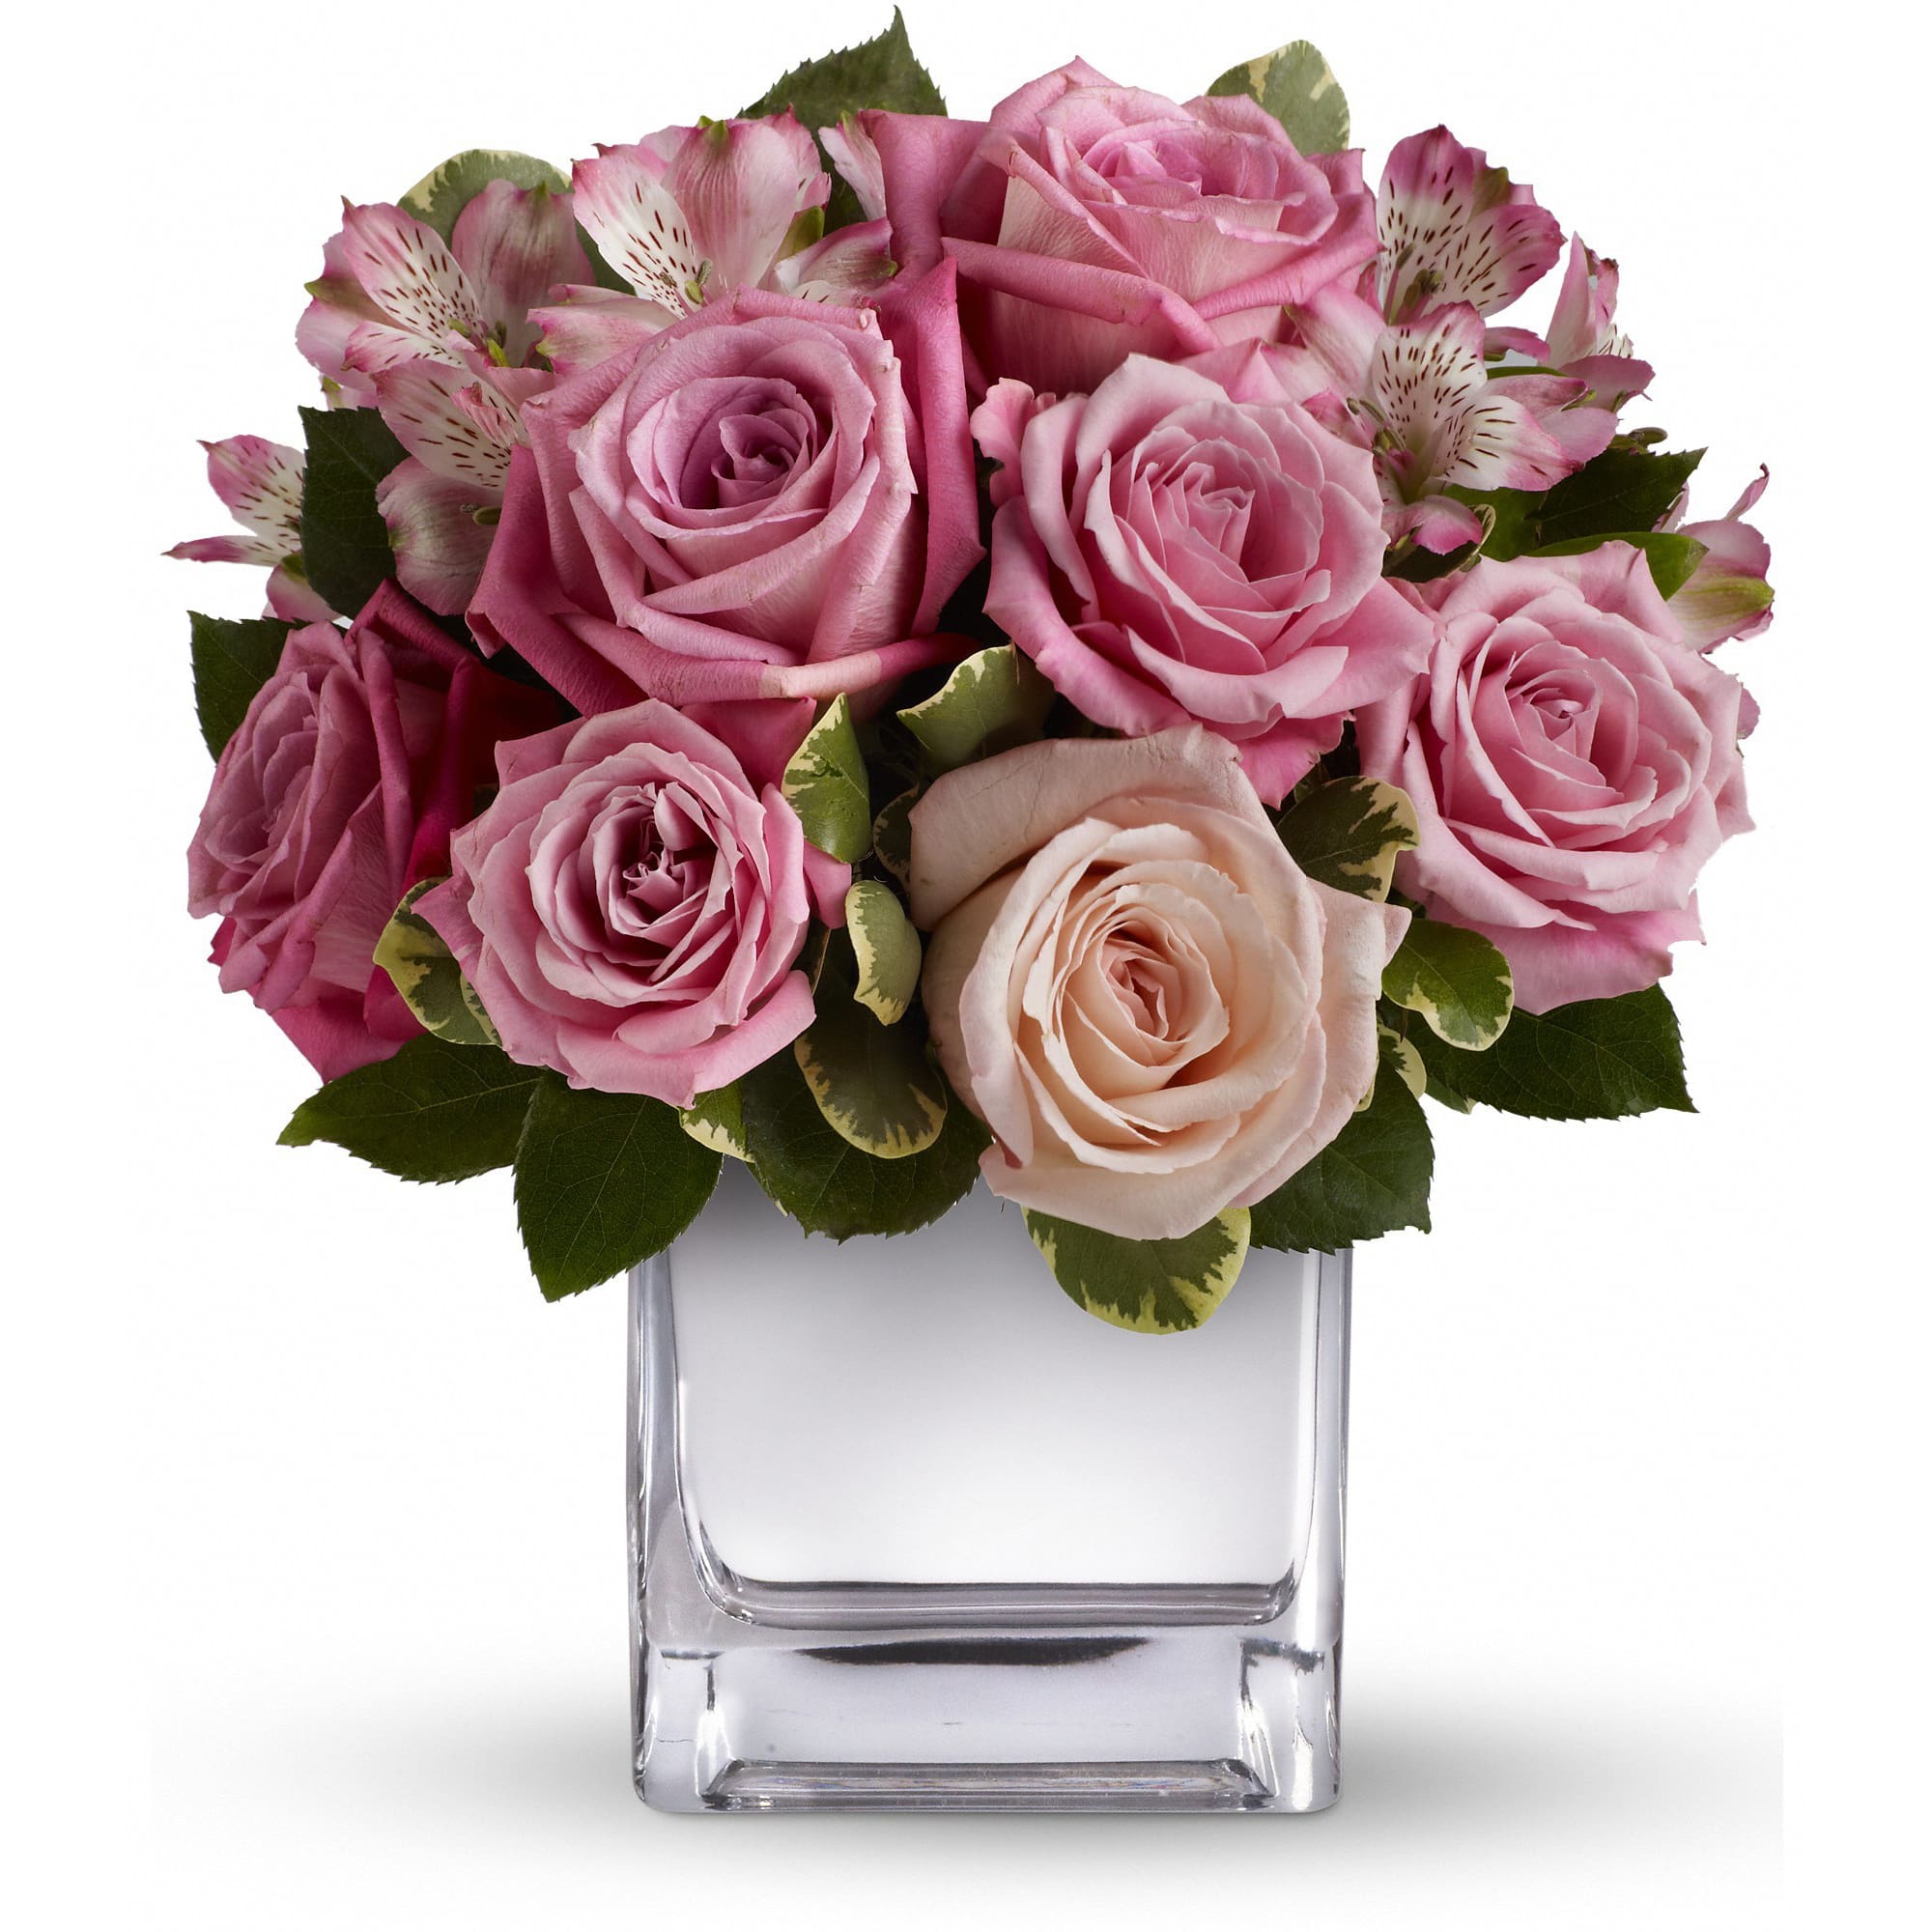 Rose Rendezvous Bouquet - This tastefully terrific bouquet features soft pink and lavender roses in a sleek contemporary silver cube vase. Understated and spectacular at the same time, it is a gorgeous gift that she'll long remember. 